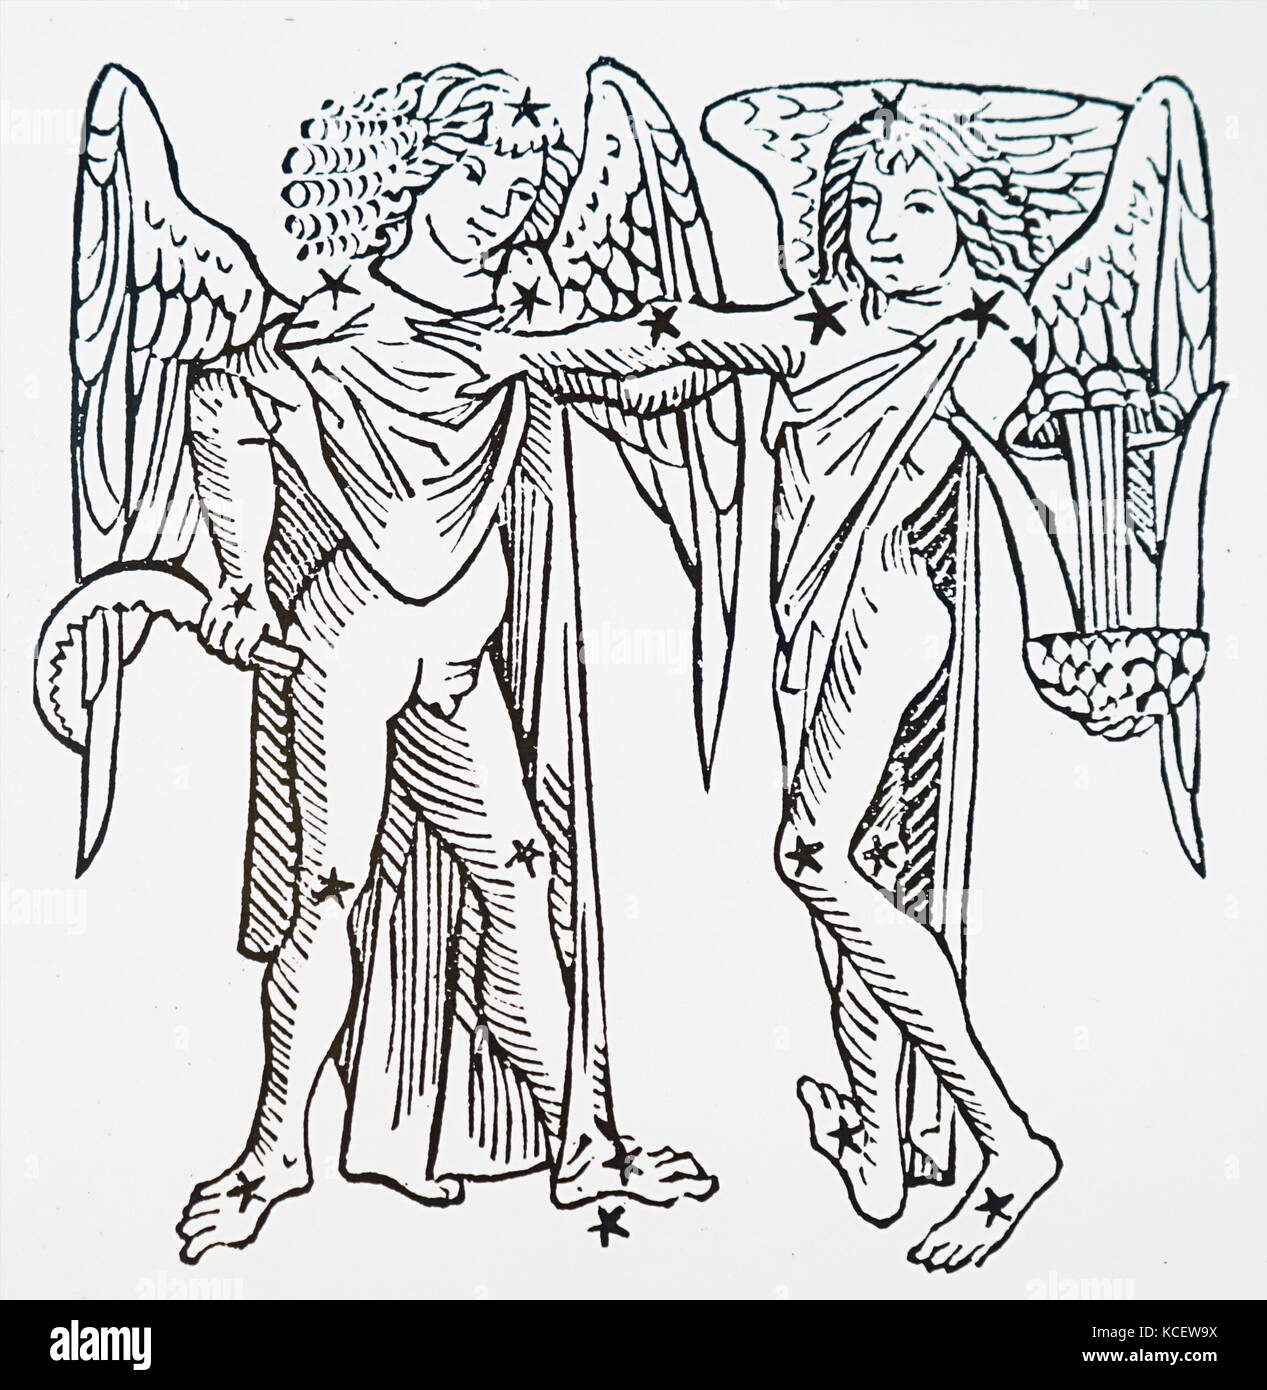 Illustration depicting the Zodiacal sign of Gemini. Dated 15th Century Stock Photo